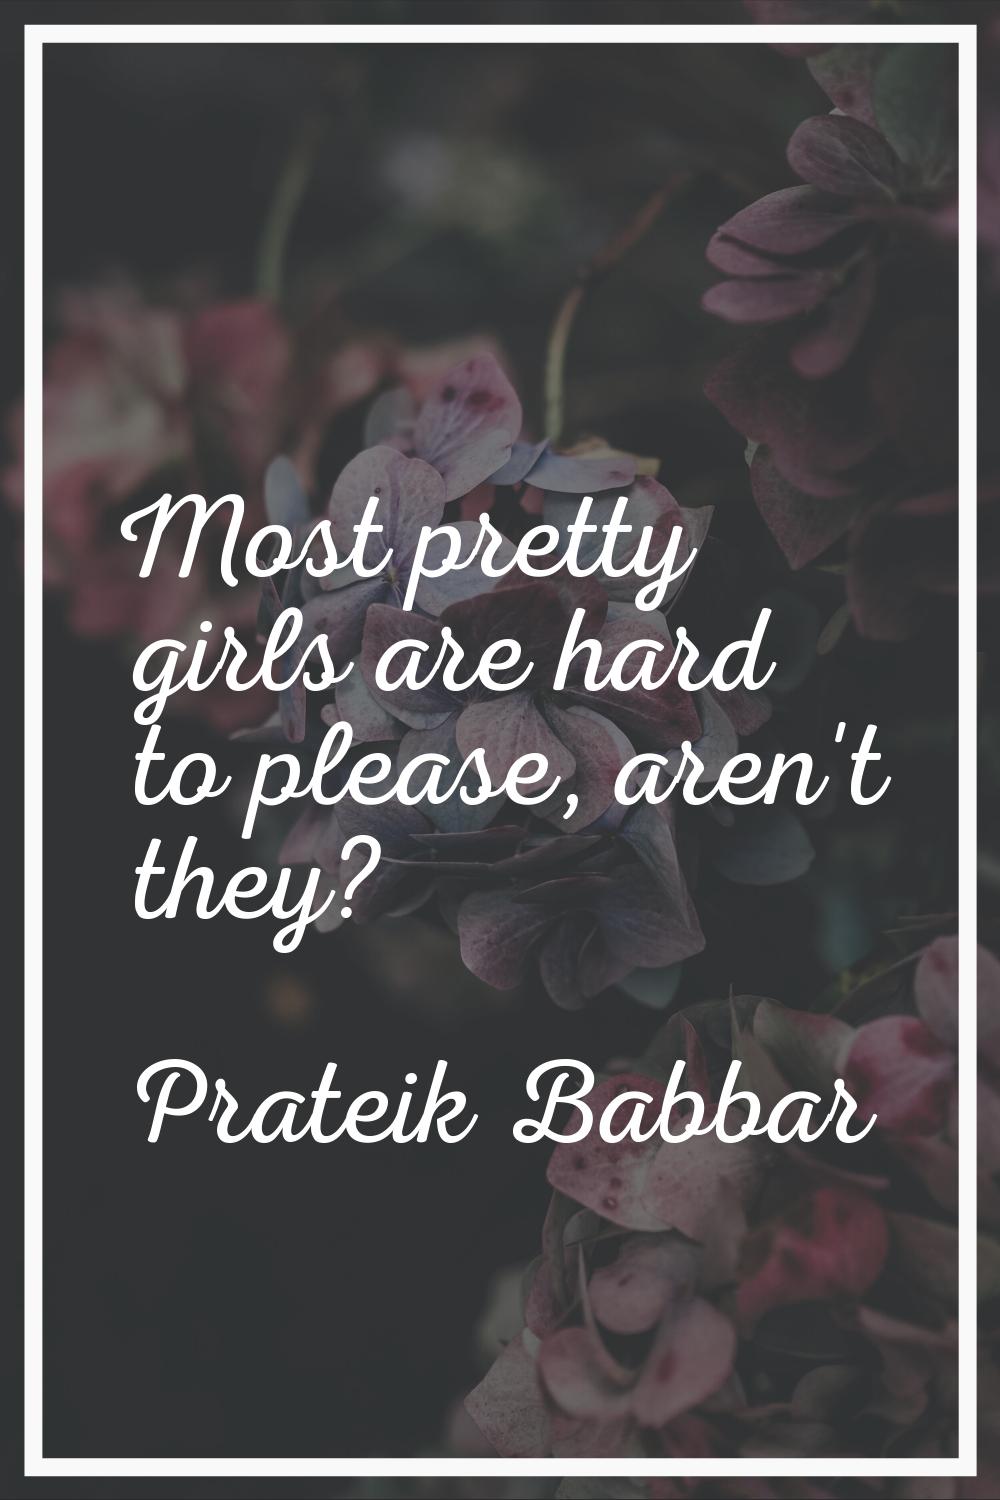 Most pretty girls are hard to please, aren't they?